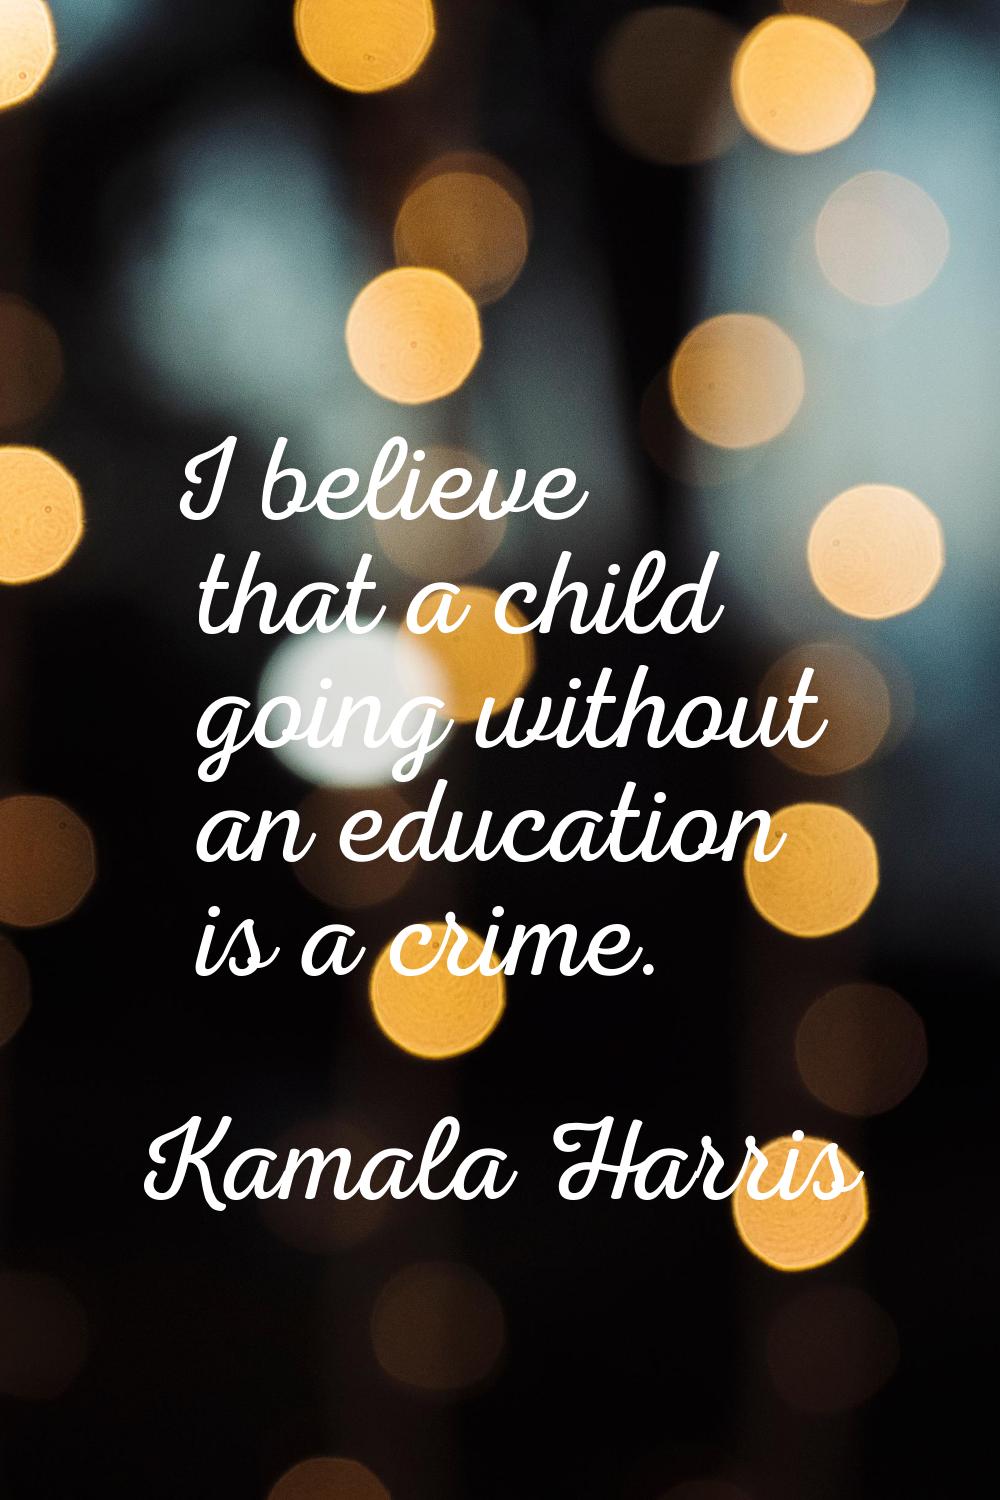 I believe that a child going without an education is a crime.